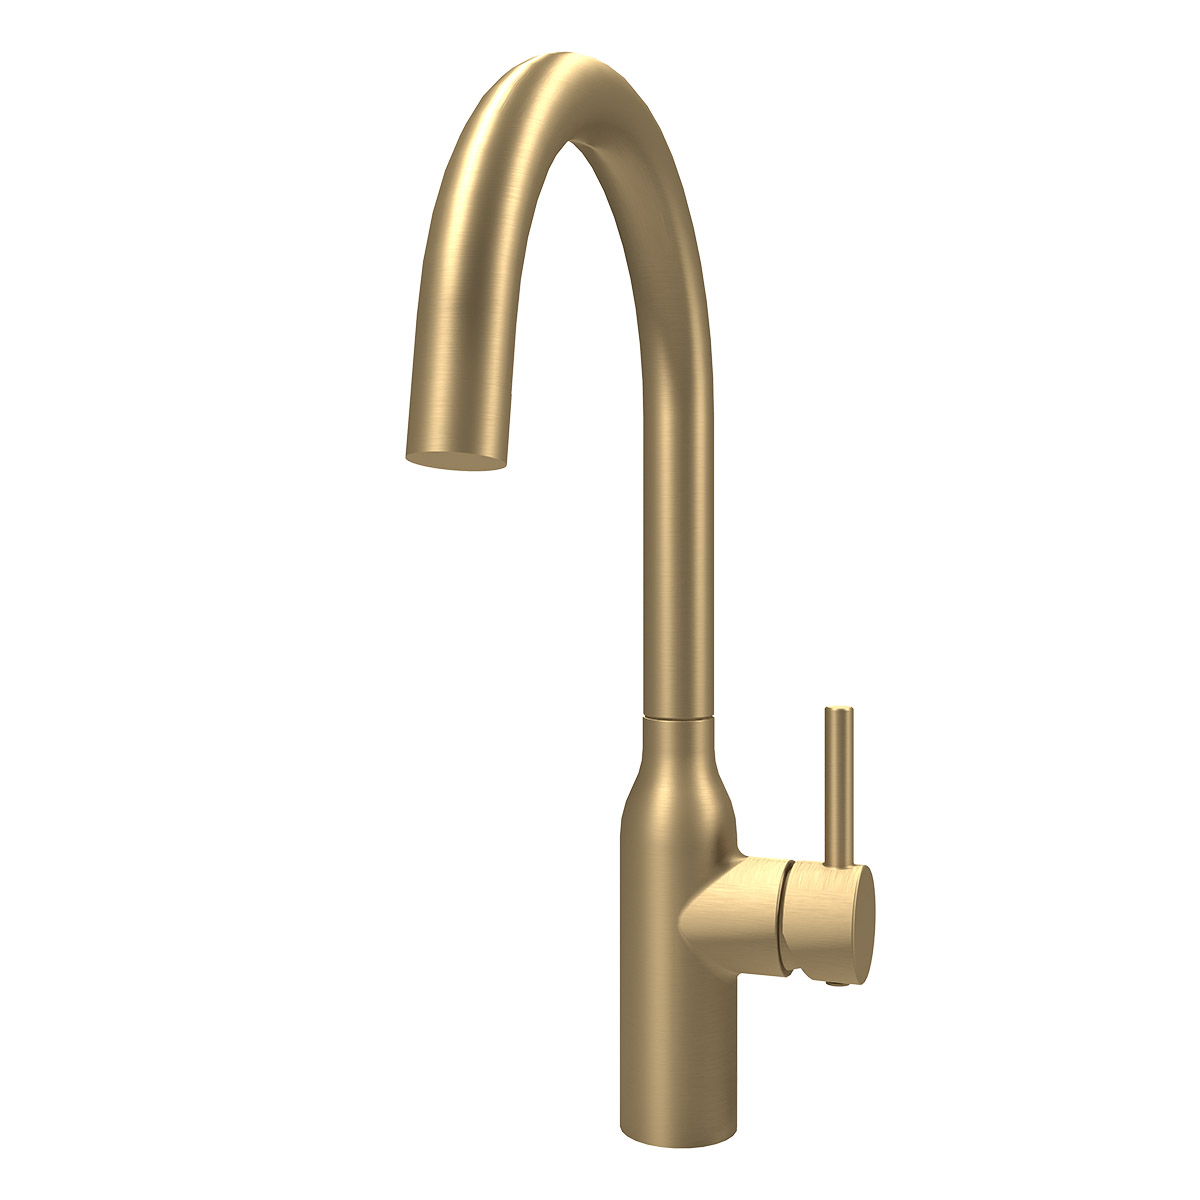 Eli single lever kitchen tap in brushed brass